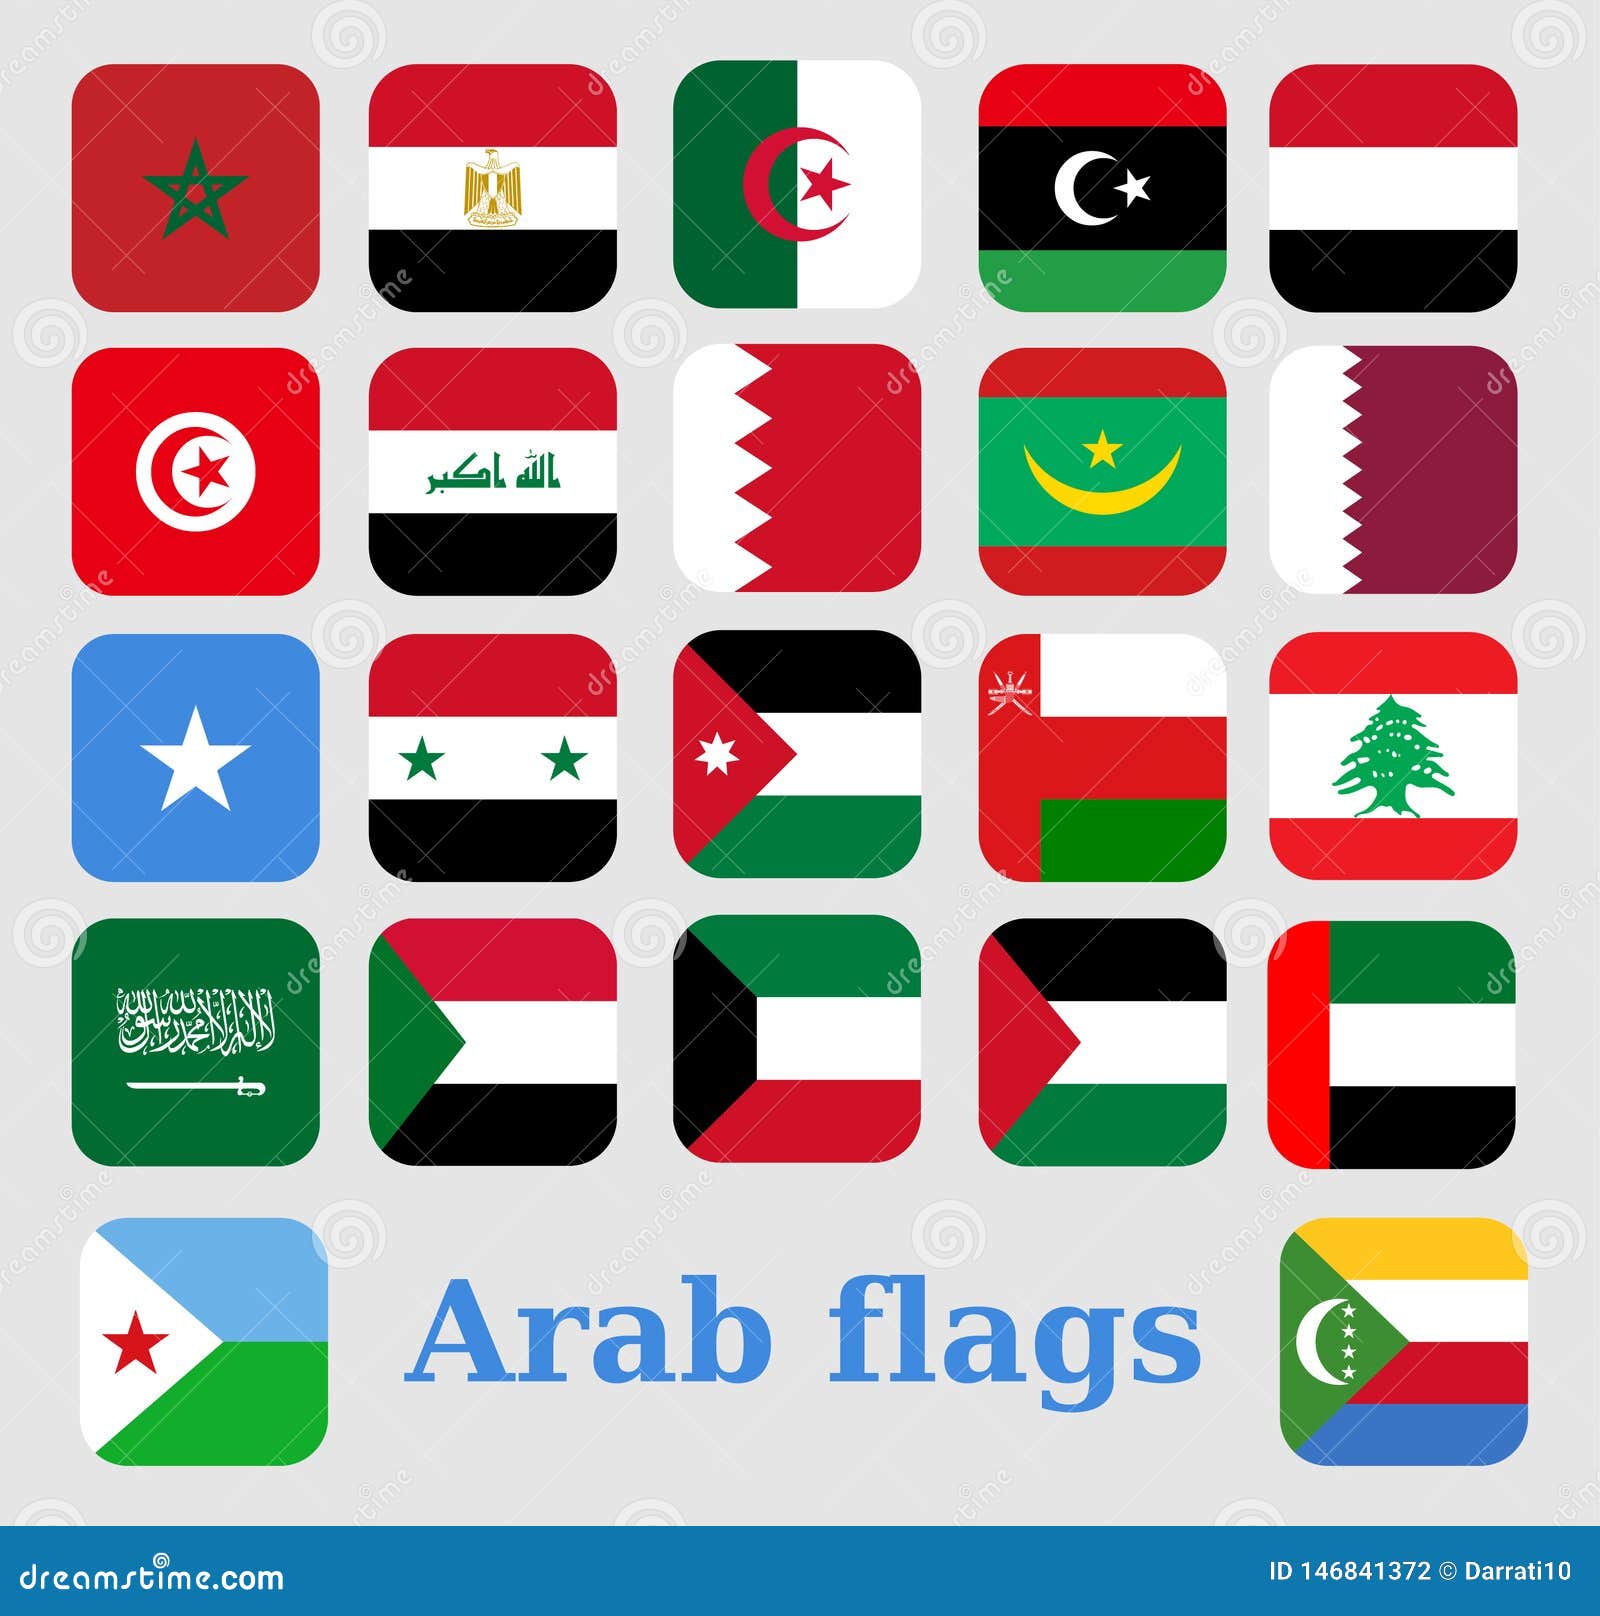 Iraq flag coloring - Country flags